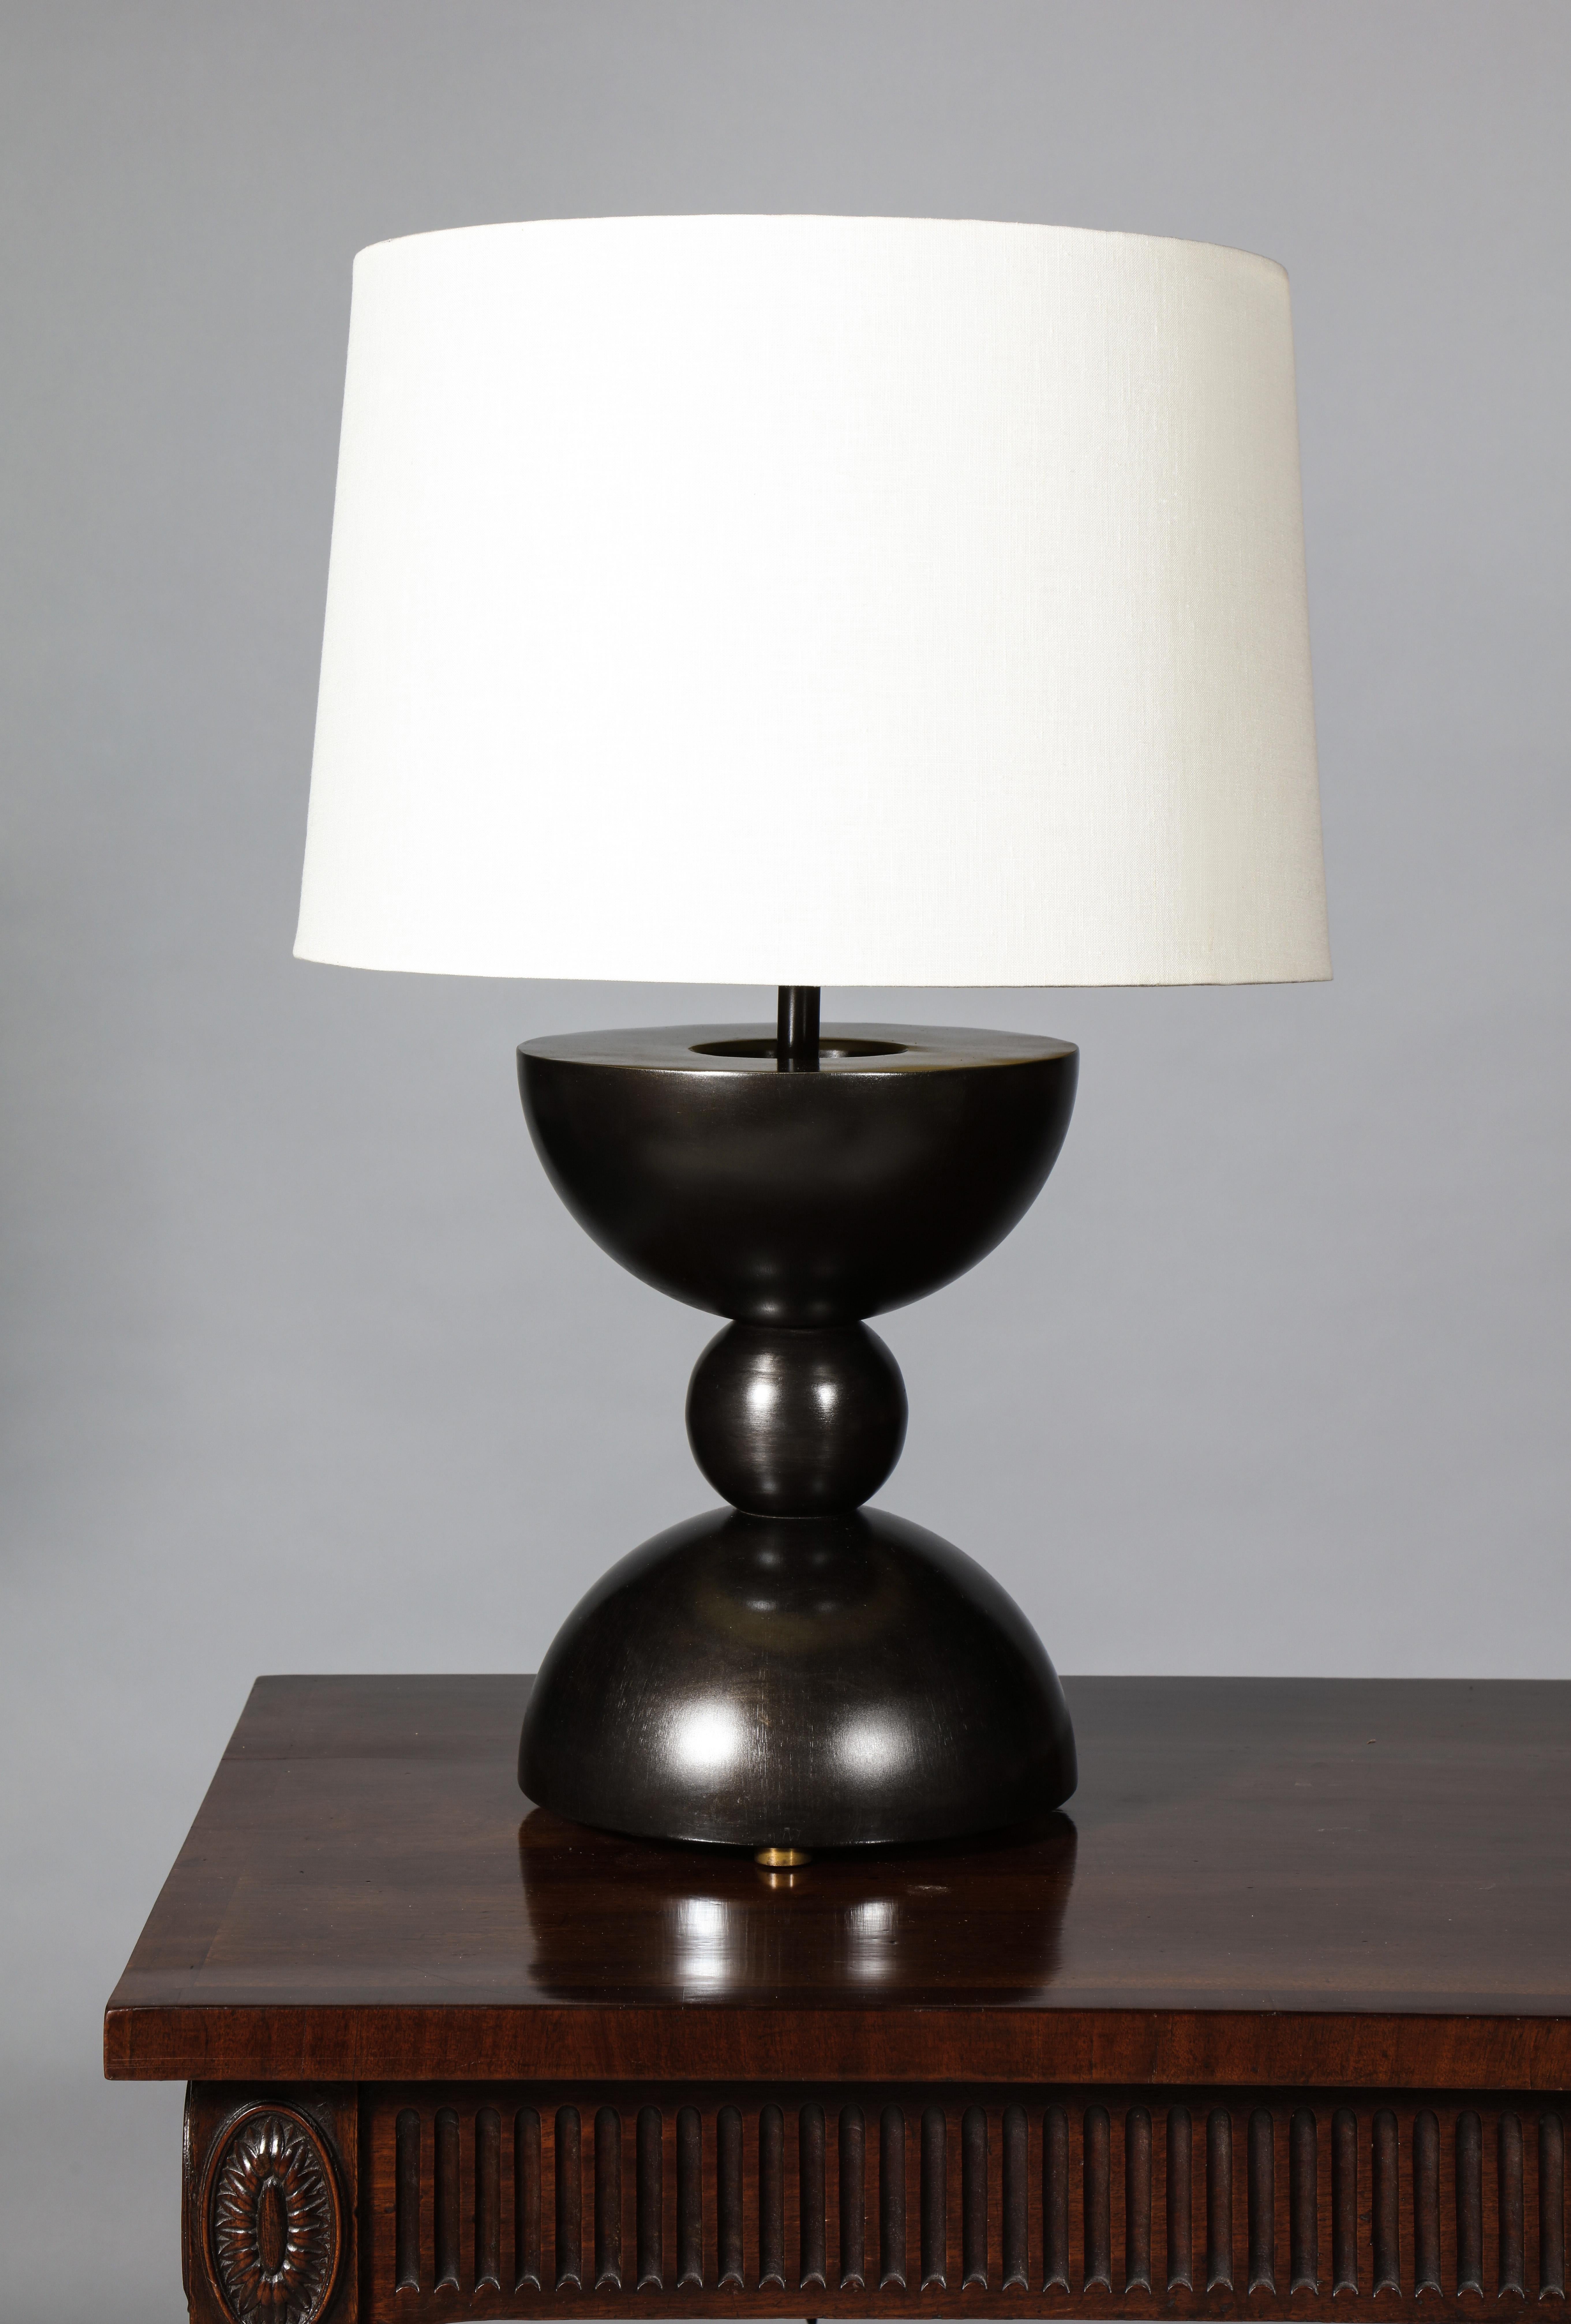 A table lamp with closed hemispherical forms cojoined by a smaller sphere. The lamp is inspired by the works of Constantin Brancusi's heavily reductive sculpture which emerged in the early/mid 20th century.

The brass detailing has been lightly